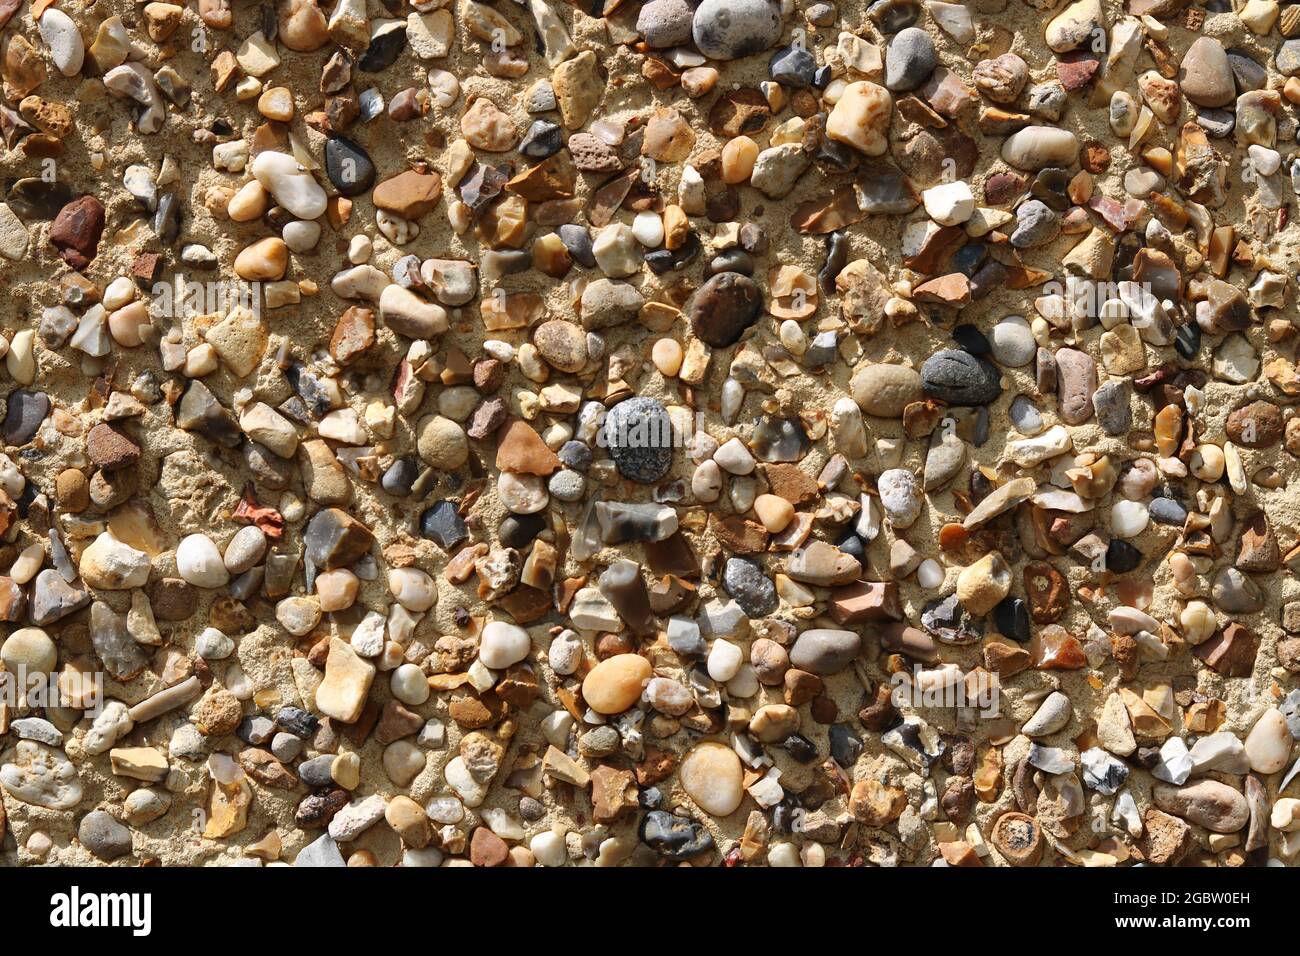 Textured pebbledash background with stones in a variety of colours Stock Photo